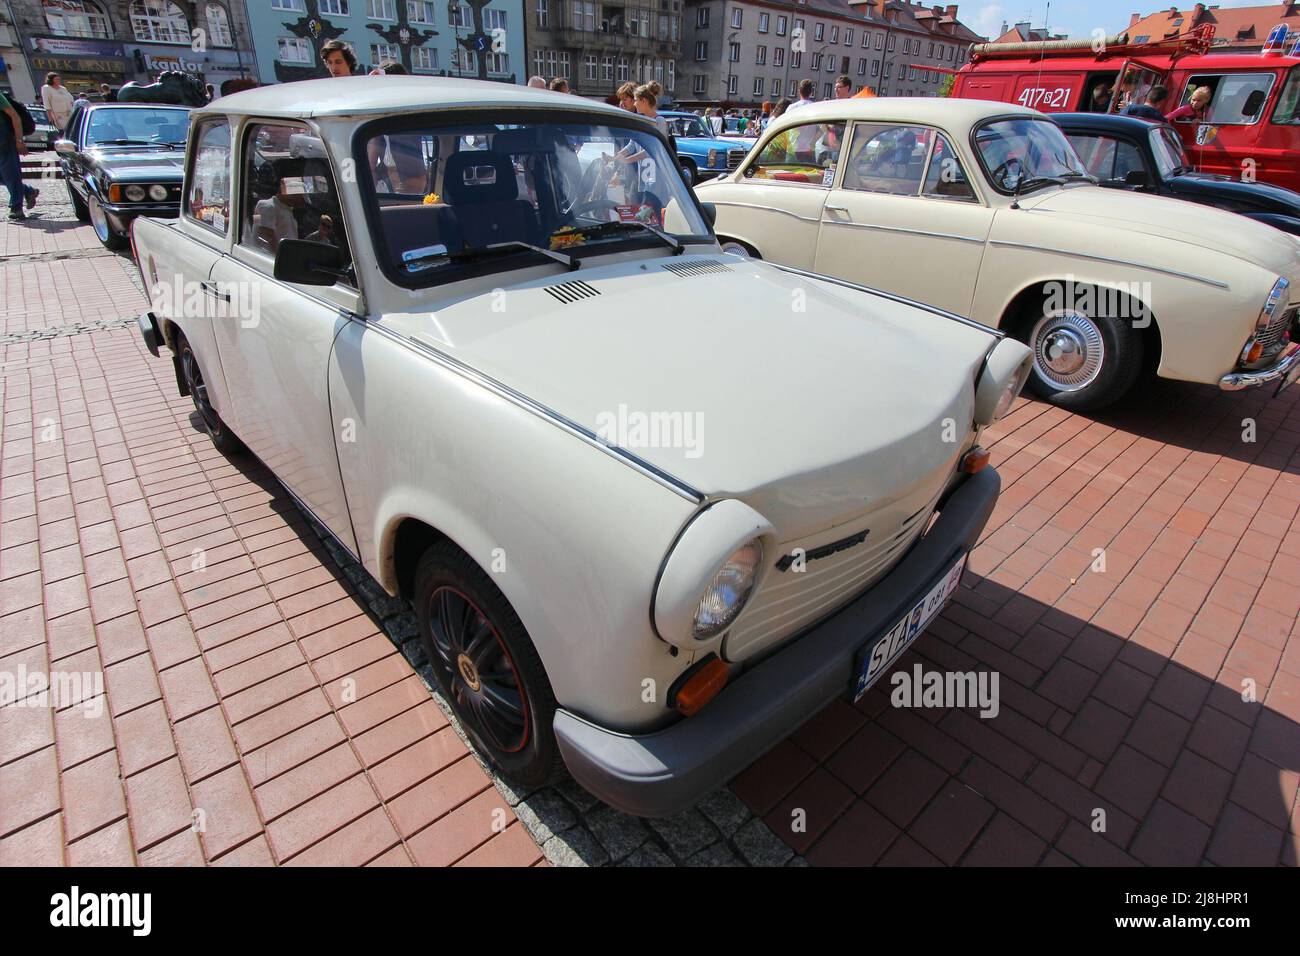 BYTOM, POLAND - SEPTEMBER 12, 2015: People walk by Trabant 601 oldtimer car during 12th Historic Vehicle Rally in Bytom. The annual vehicle parade is Stock Photo